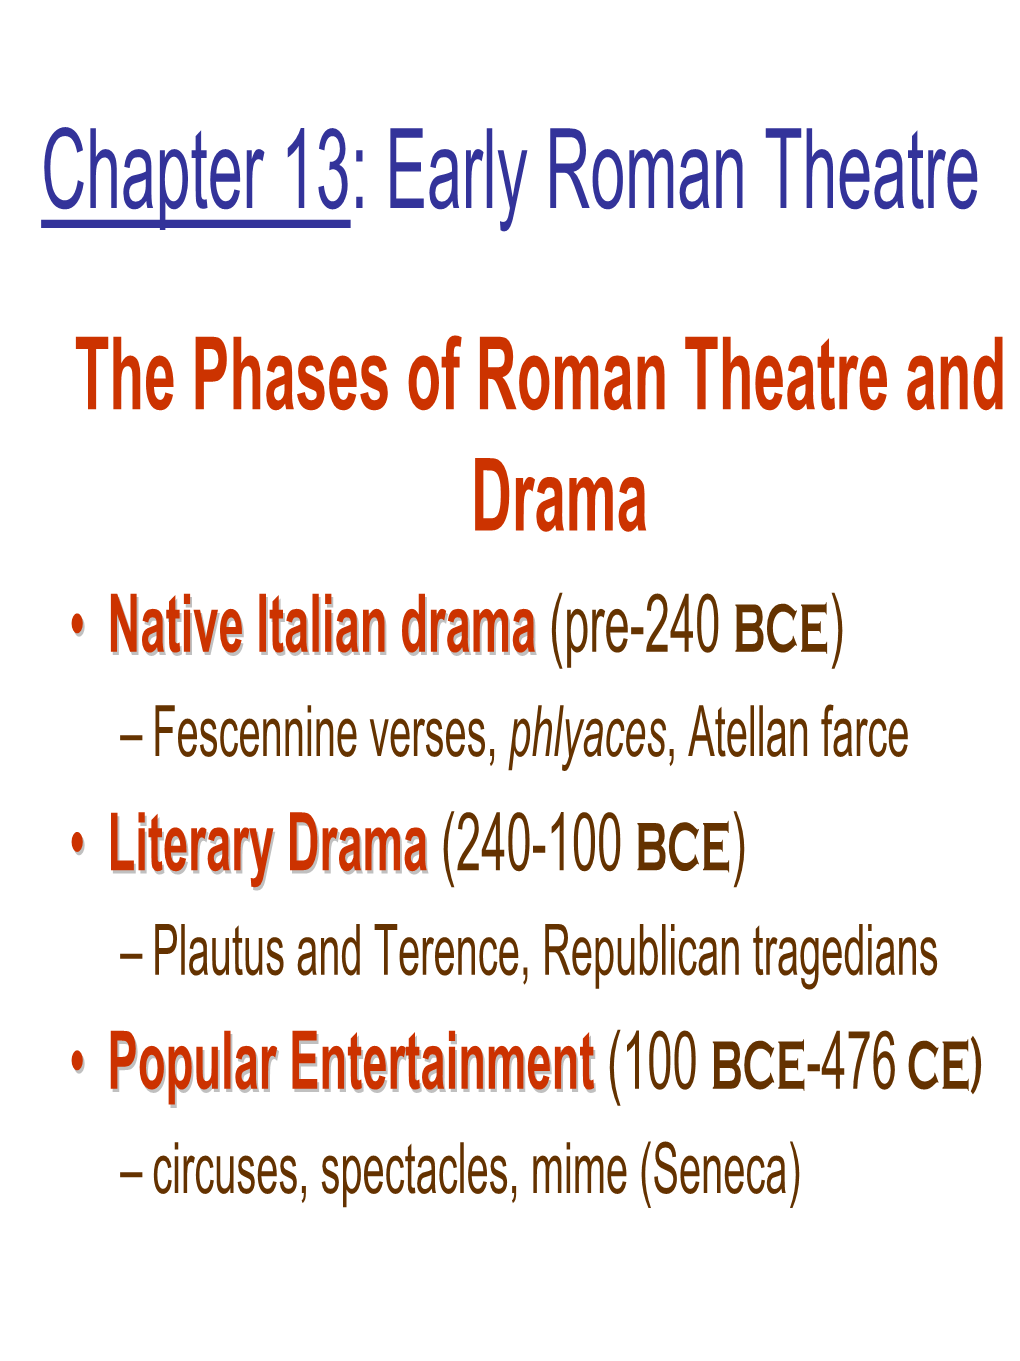 Early Roman Drama and Theatre